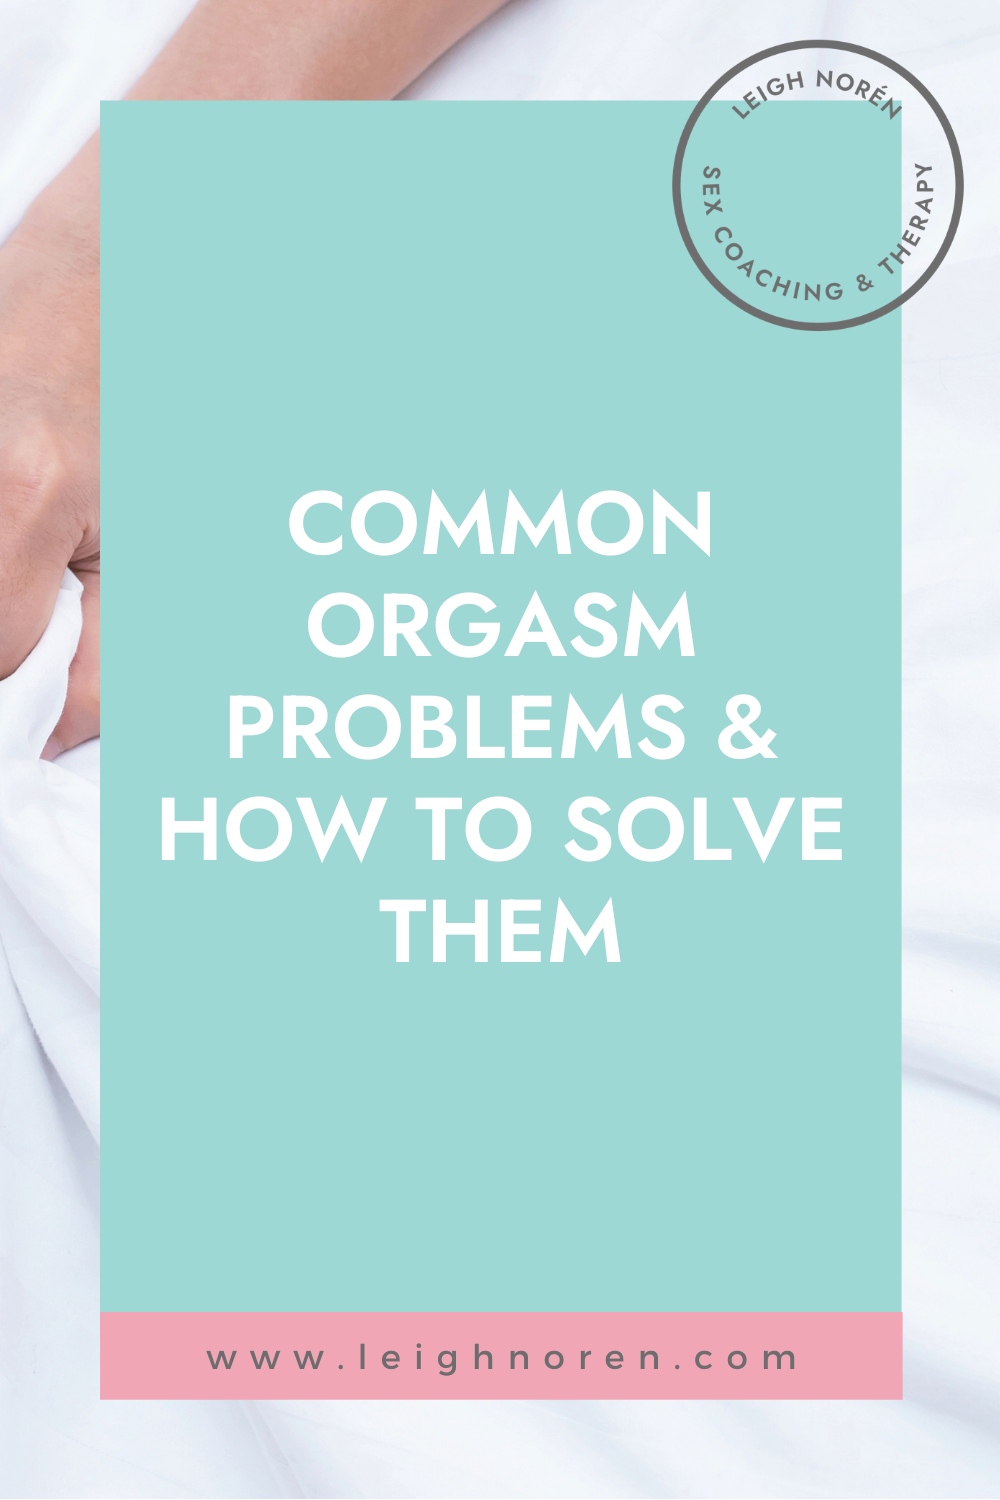 Common Orgasm Problems & How to Solve Them